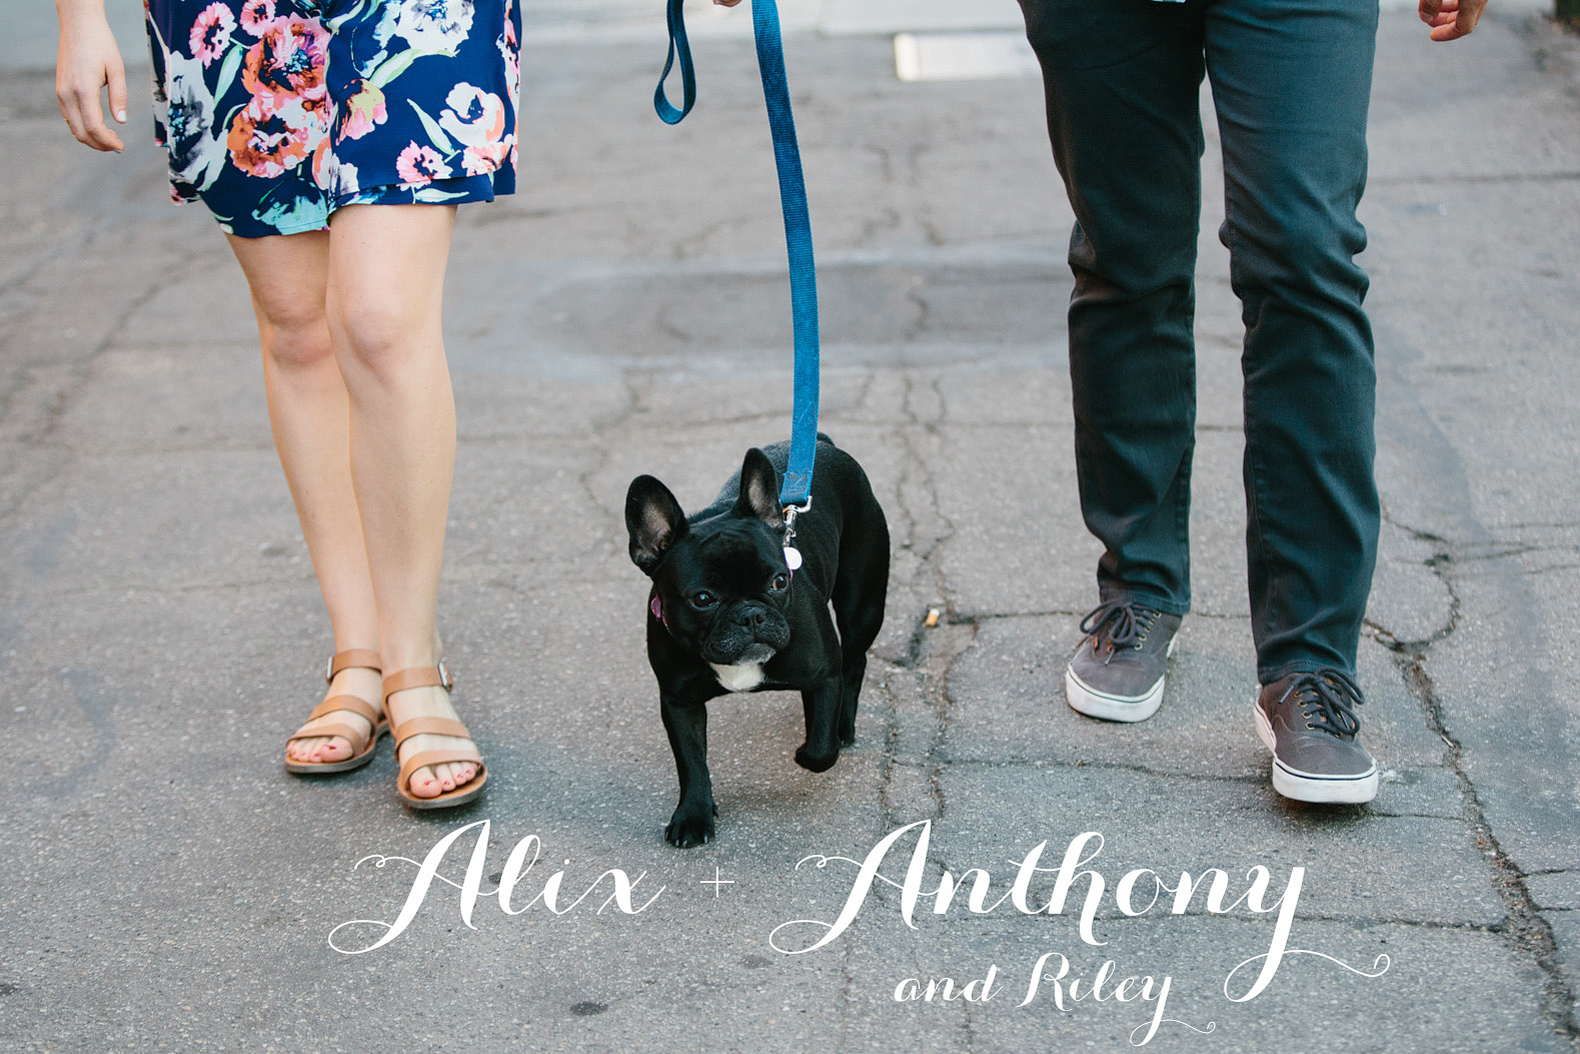 Alix and Anthony's engagement session. 